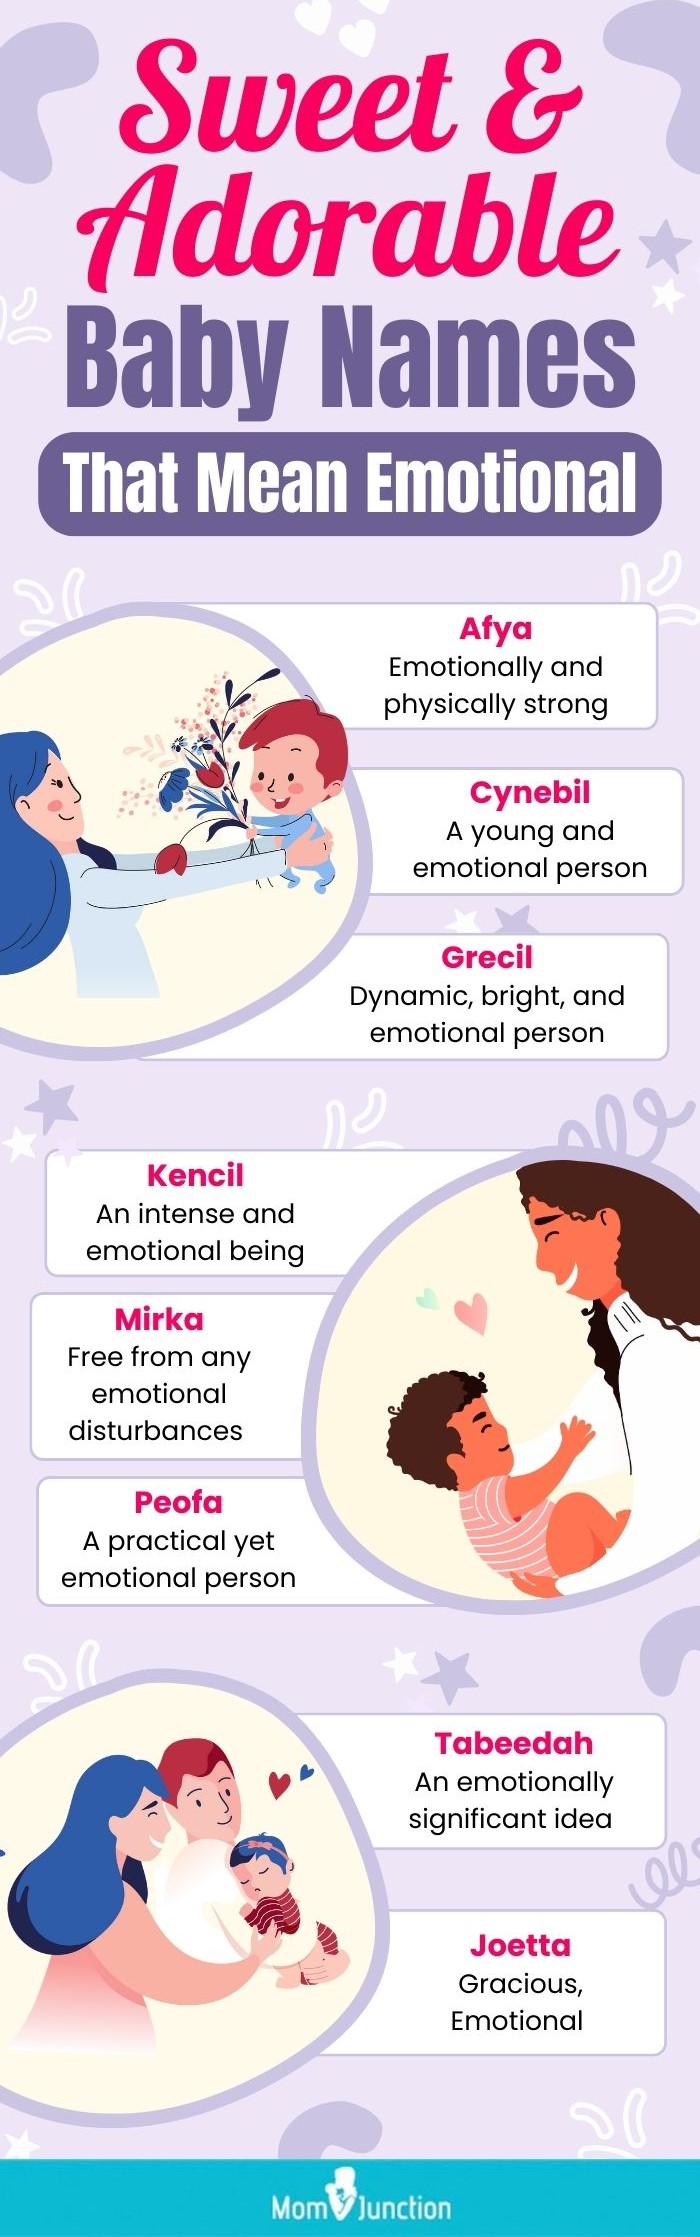 sweet and adorable baby names that mean emotional (infographic)